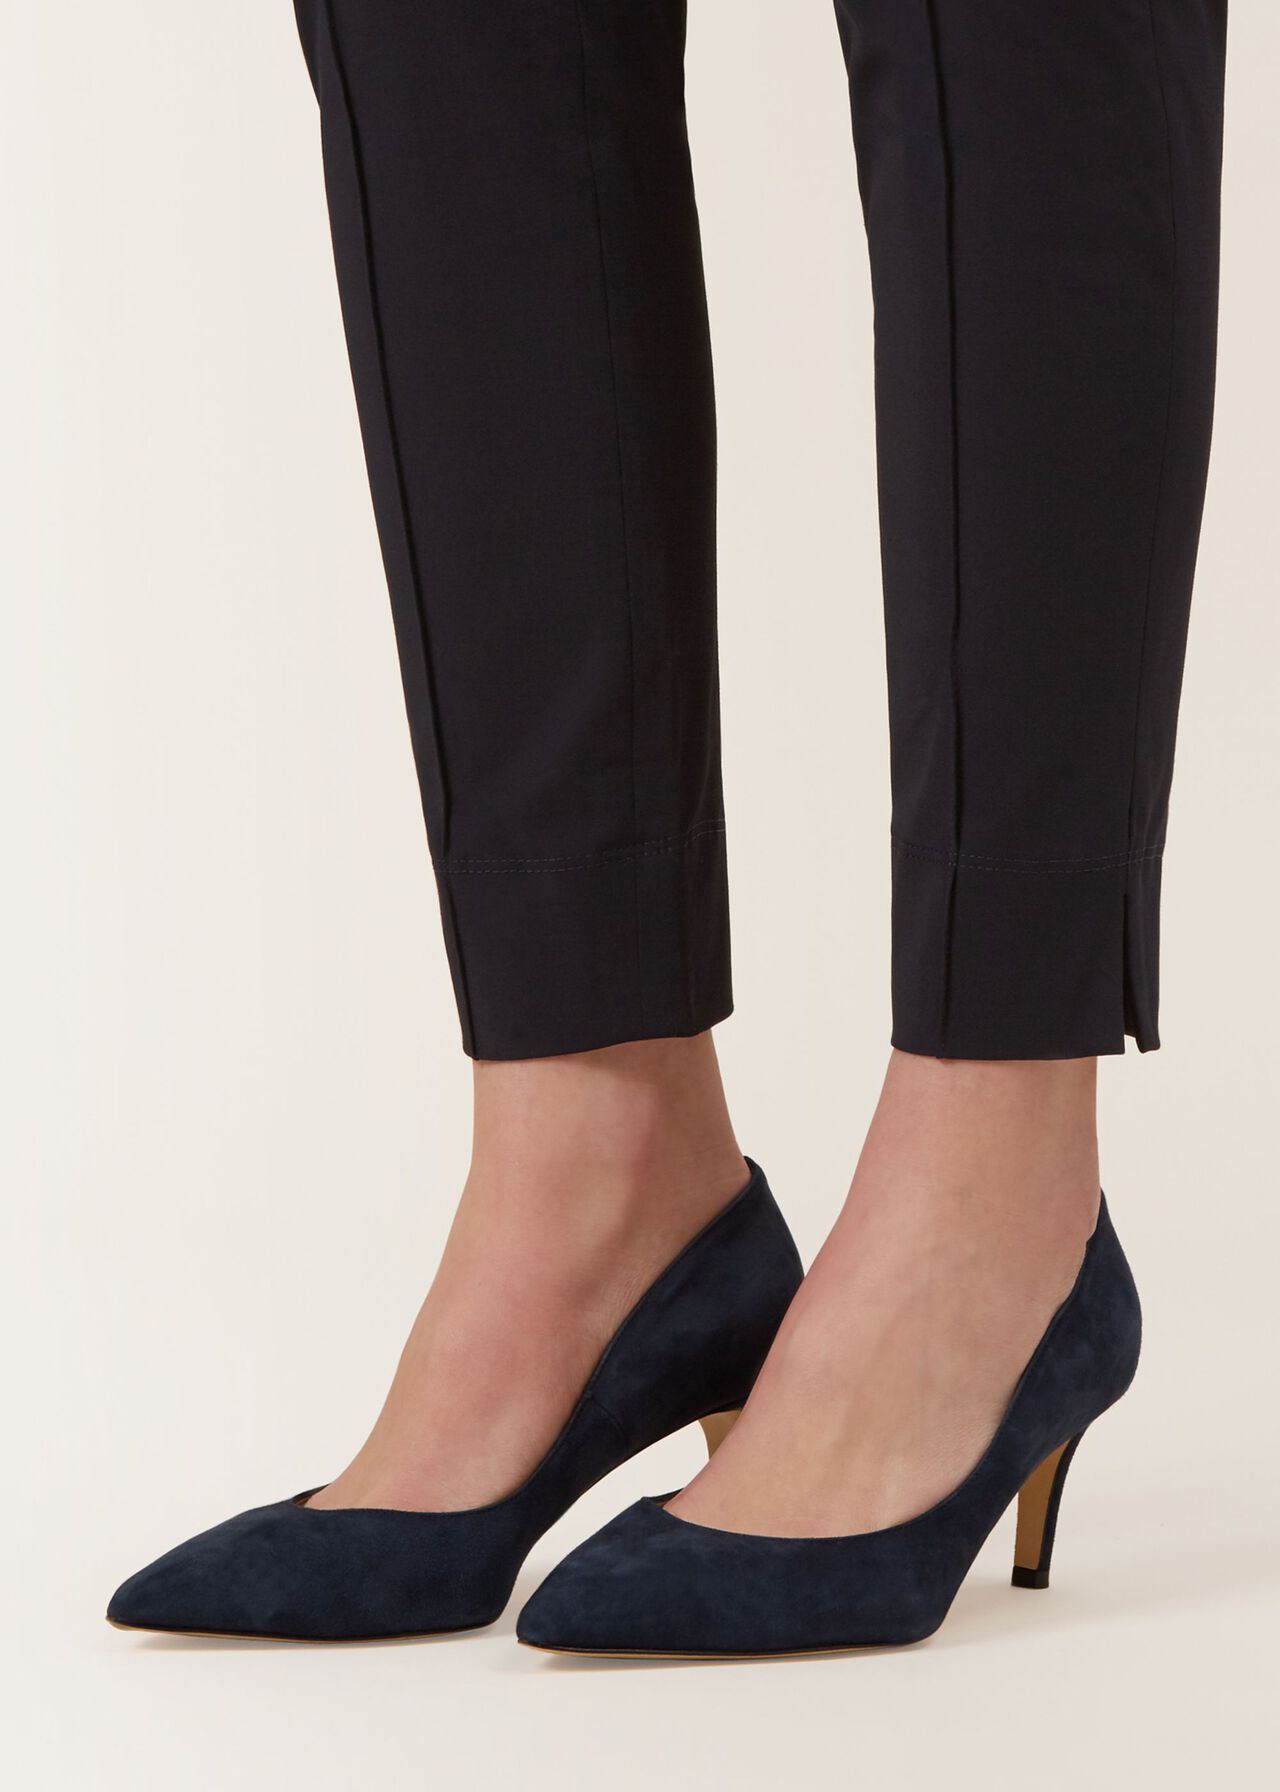 Adrianna trousers With Stretch, Navy, hi-res